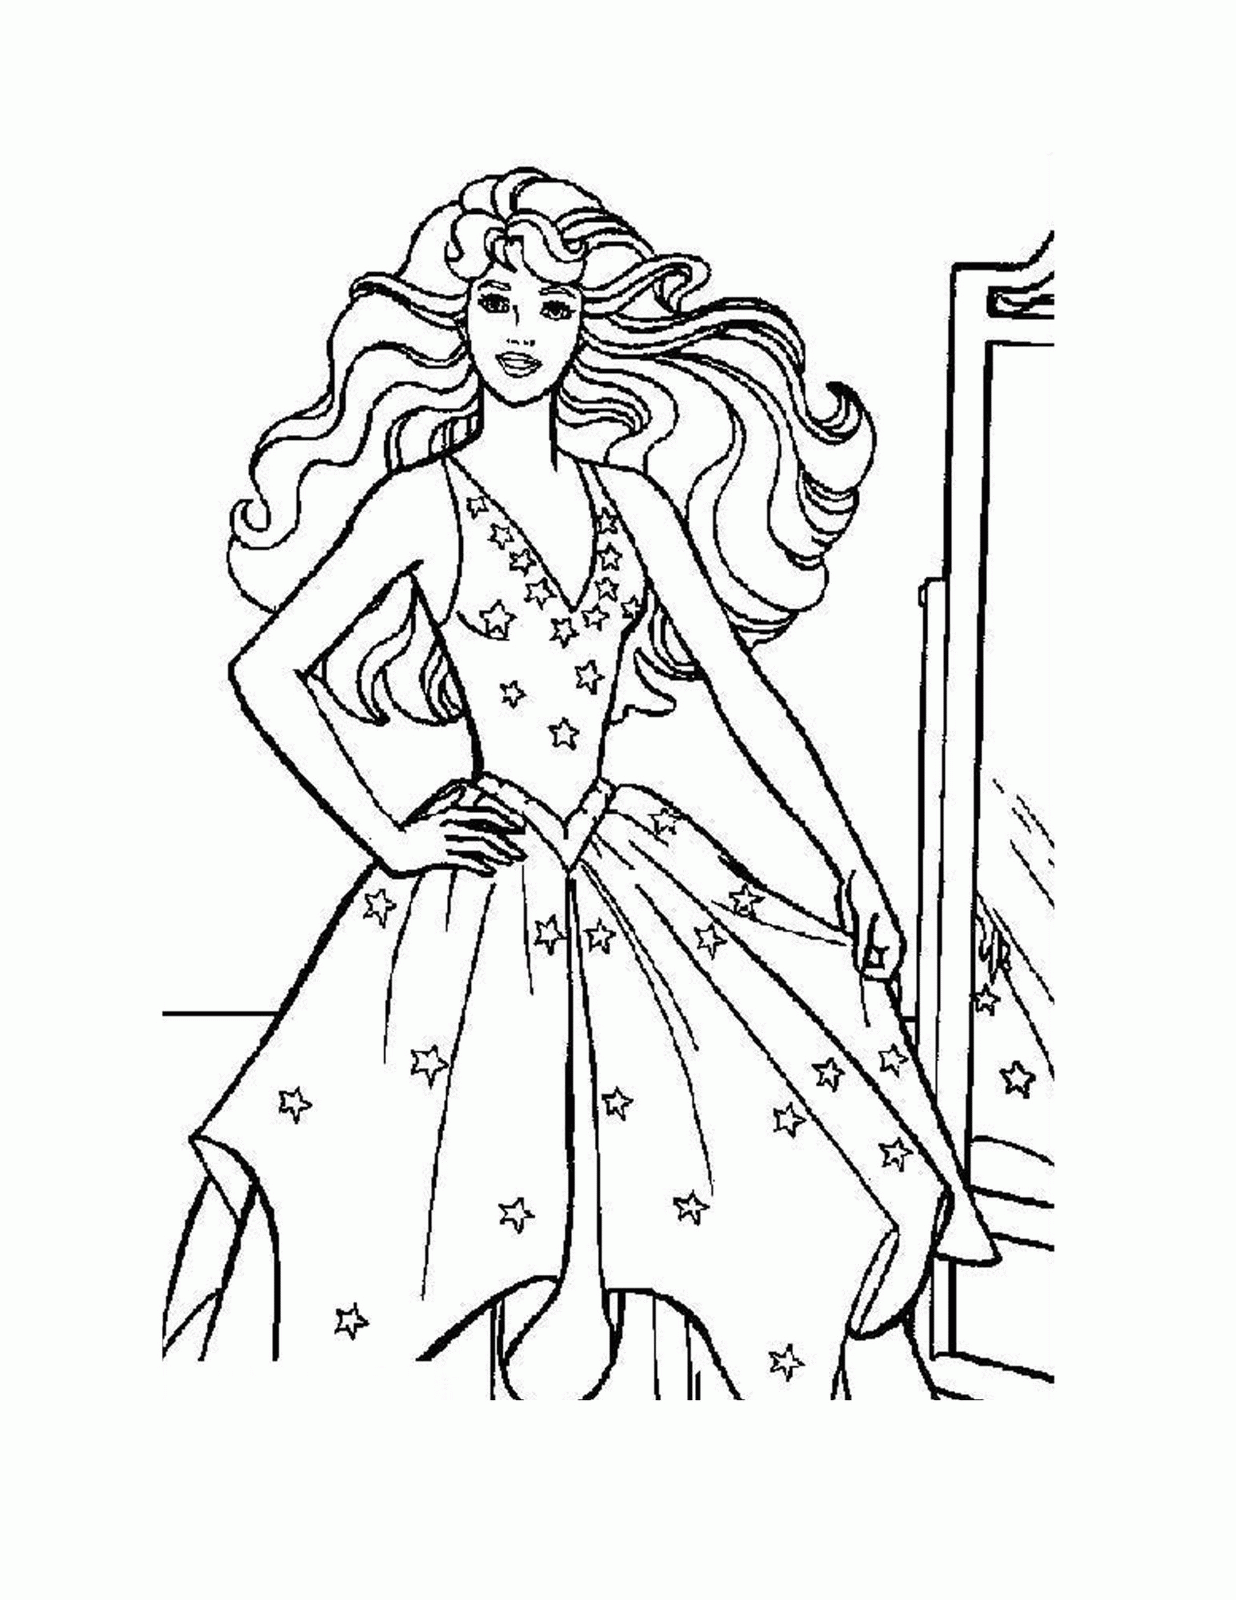 Disney Princess Coloring Pages Free To Print - Coloring Home